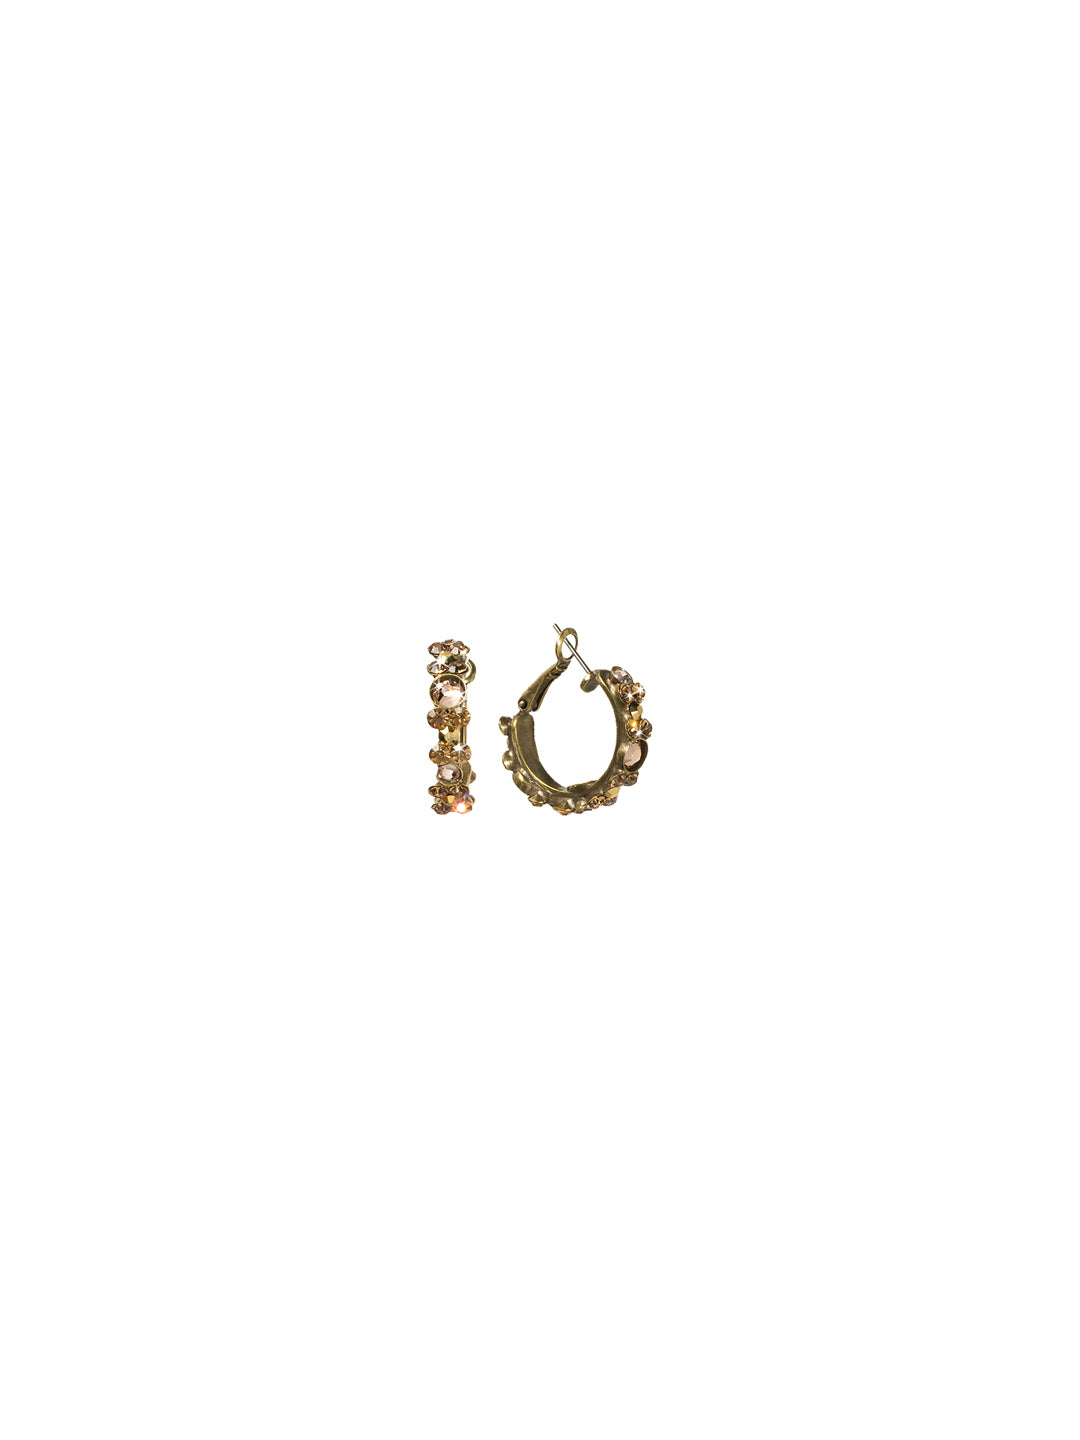 Floral Hoop Earrings - EBP15AGRSU - <p>Intricate design, infused with gorgeous shine. A motif of floral clusters is featured here on a small, delicate hoop with a hinged post backing. From Sorrelli's Raw Sugar collection in our Antique Gold-tone finish.</p>